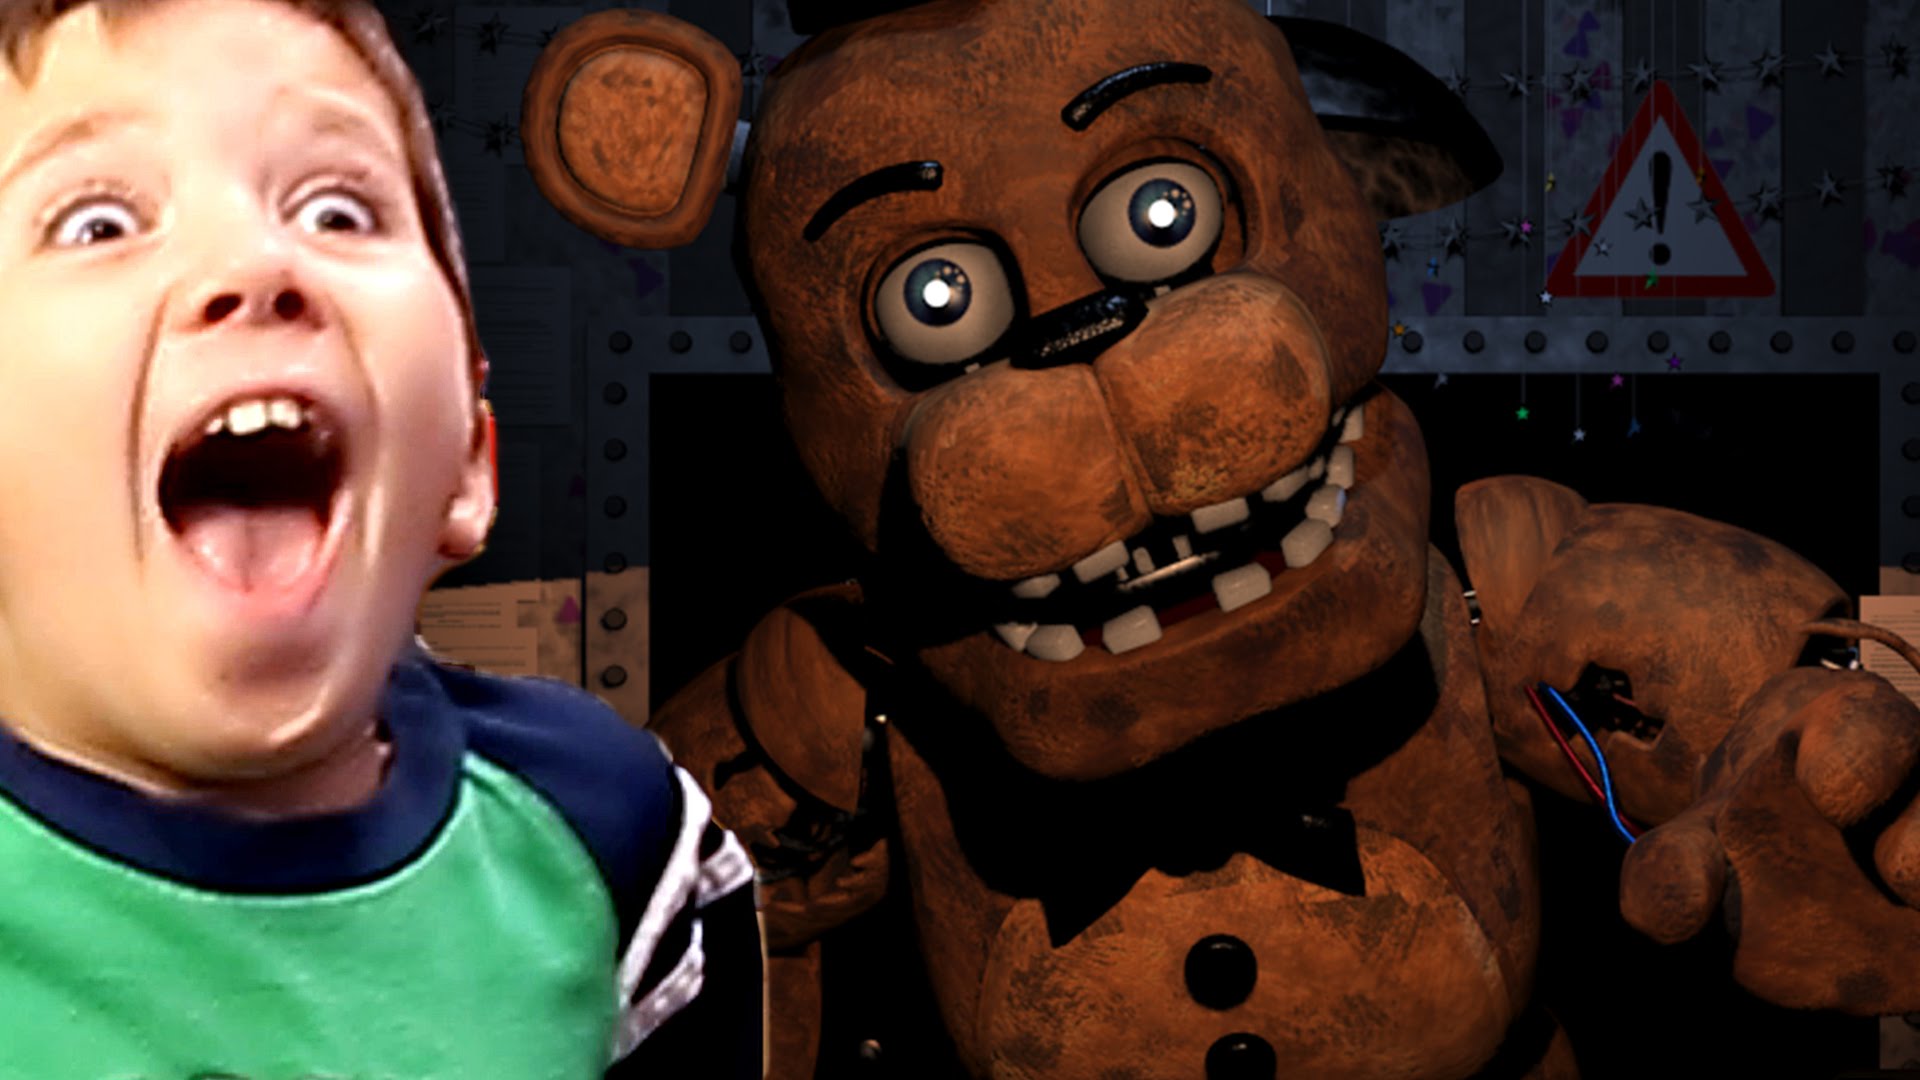 Five-Nights-at-Freddys-2-NIGHT-2-WITH-JACOB-PART-7